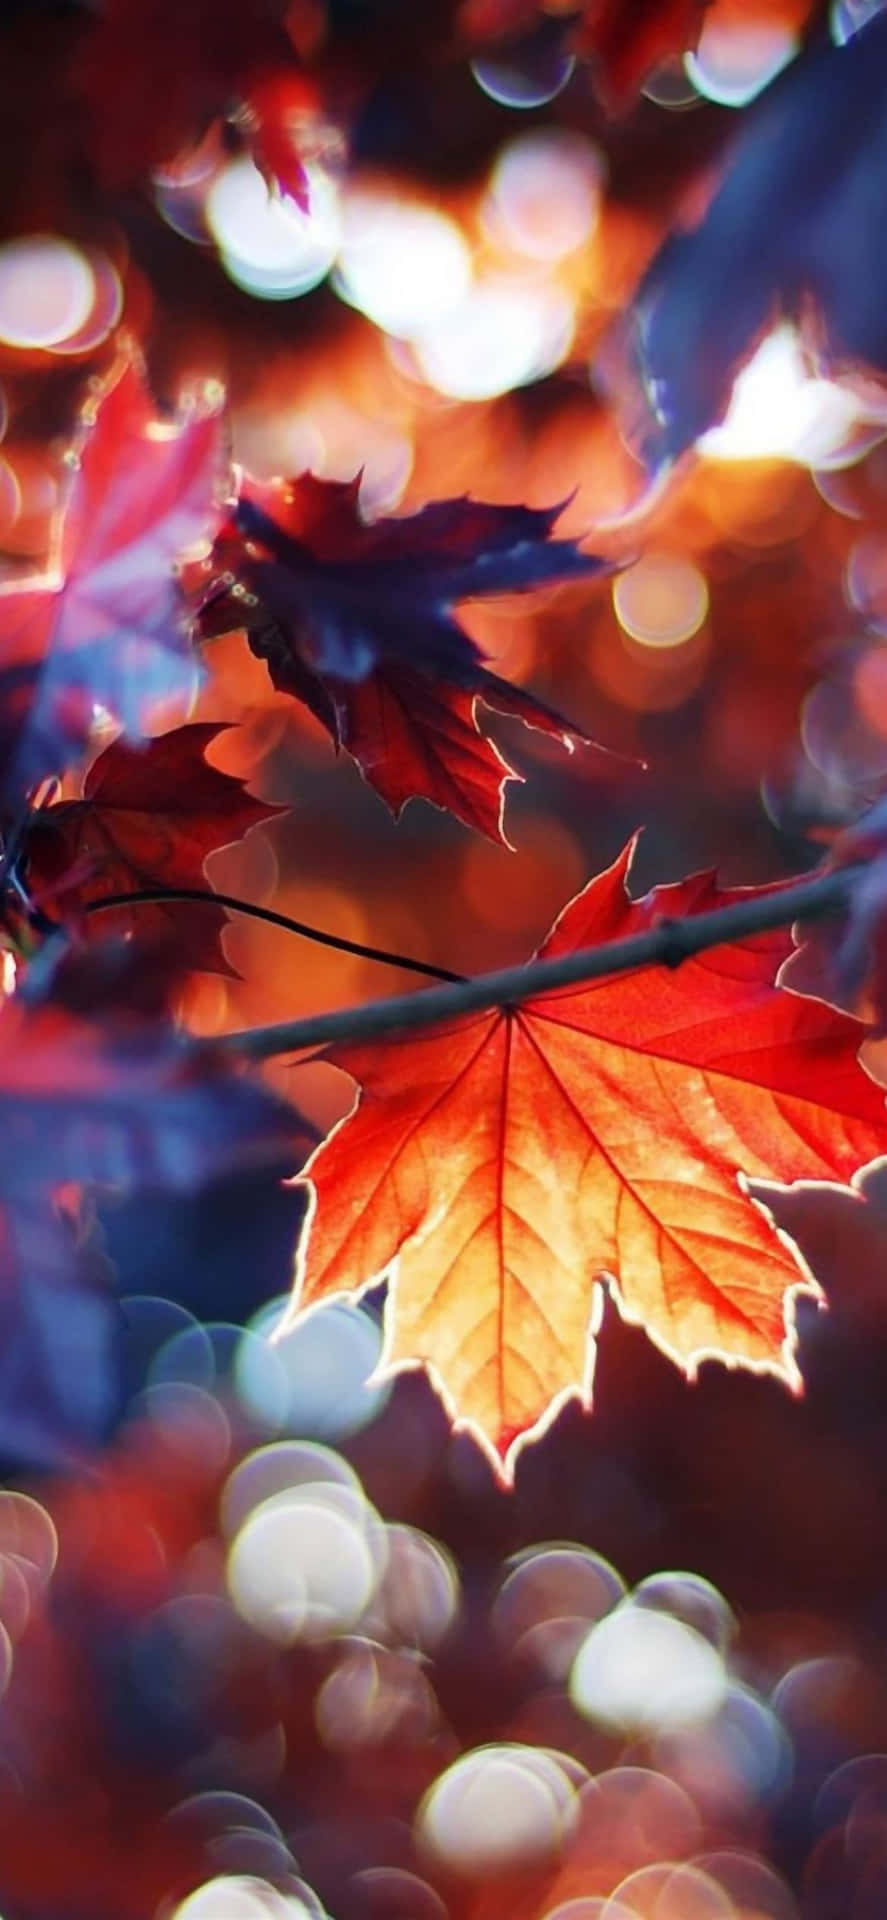 Image  A Bright Red and Orange Autumn Leaf Wallpaper